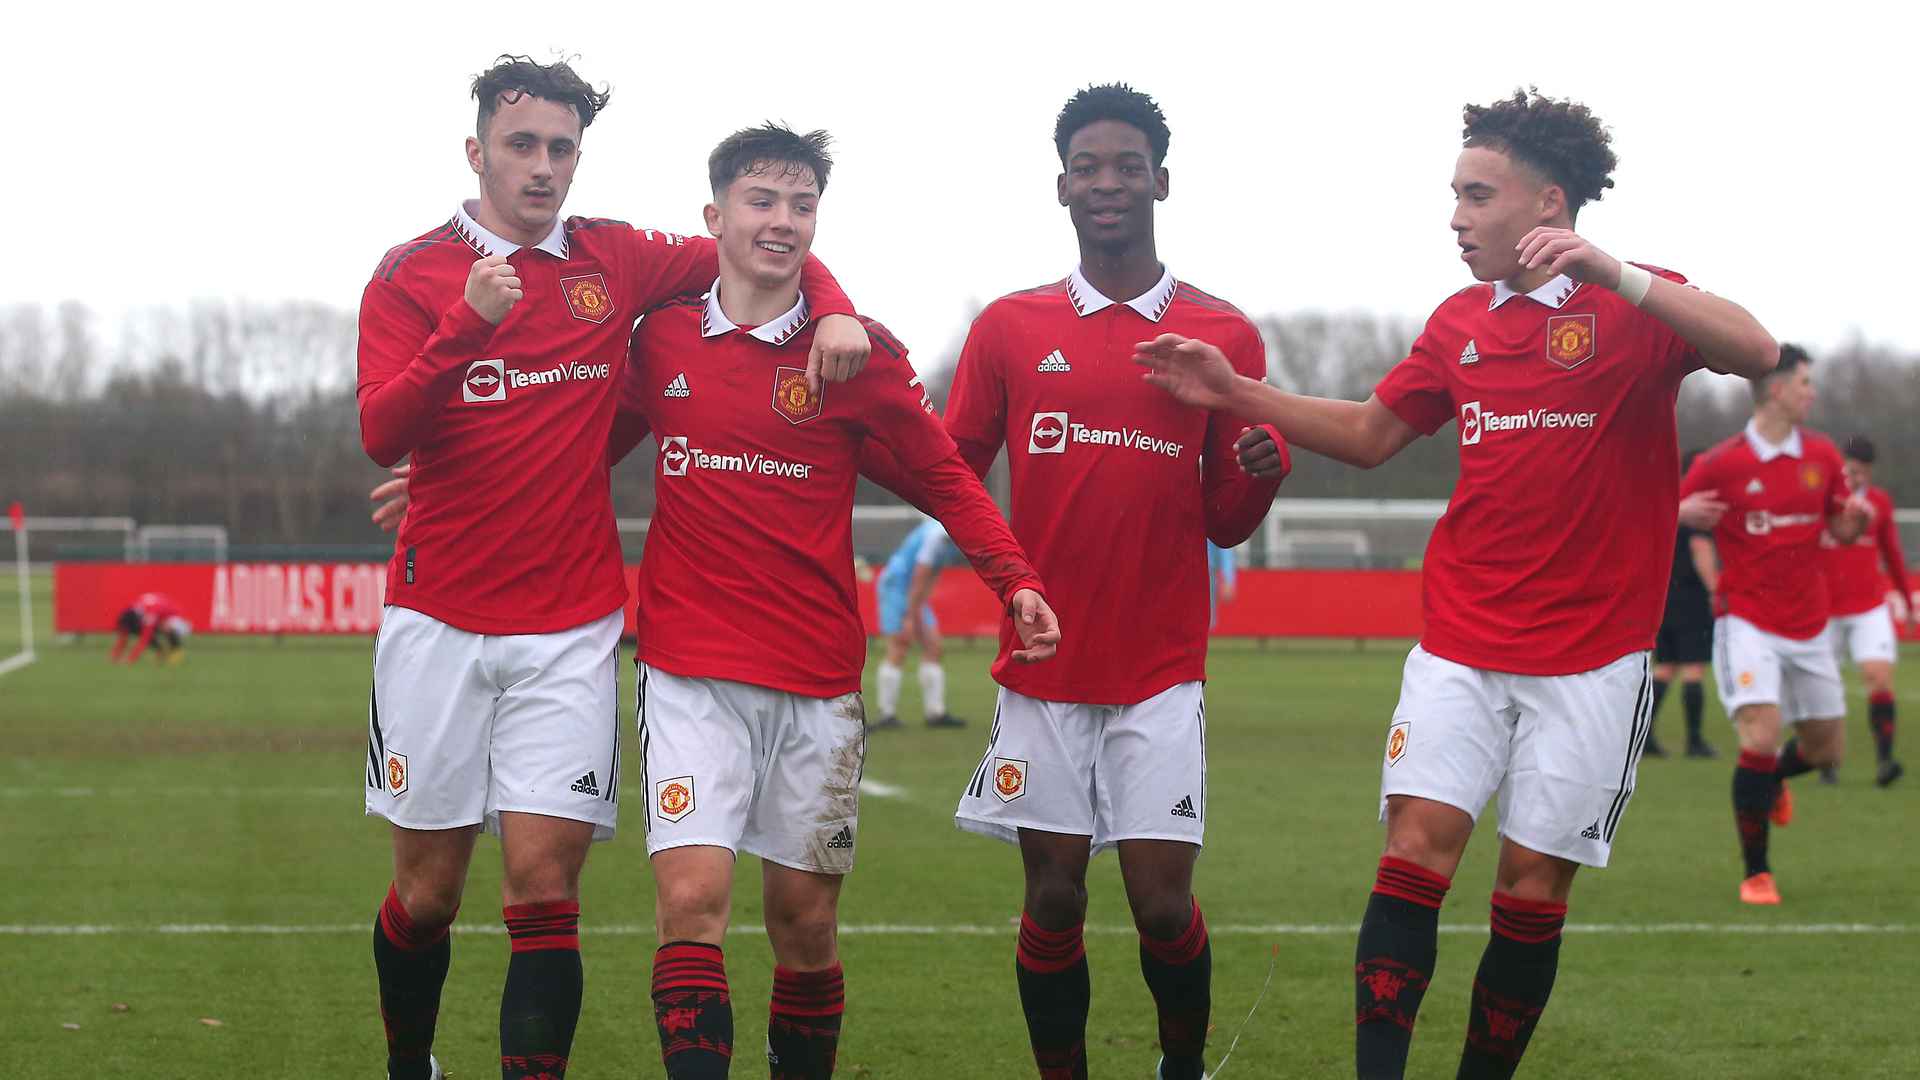 U18s FA Youth Cup Preview for Stoke City v Man Utd 11 January 2023